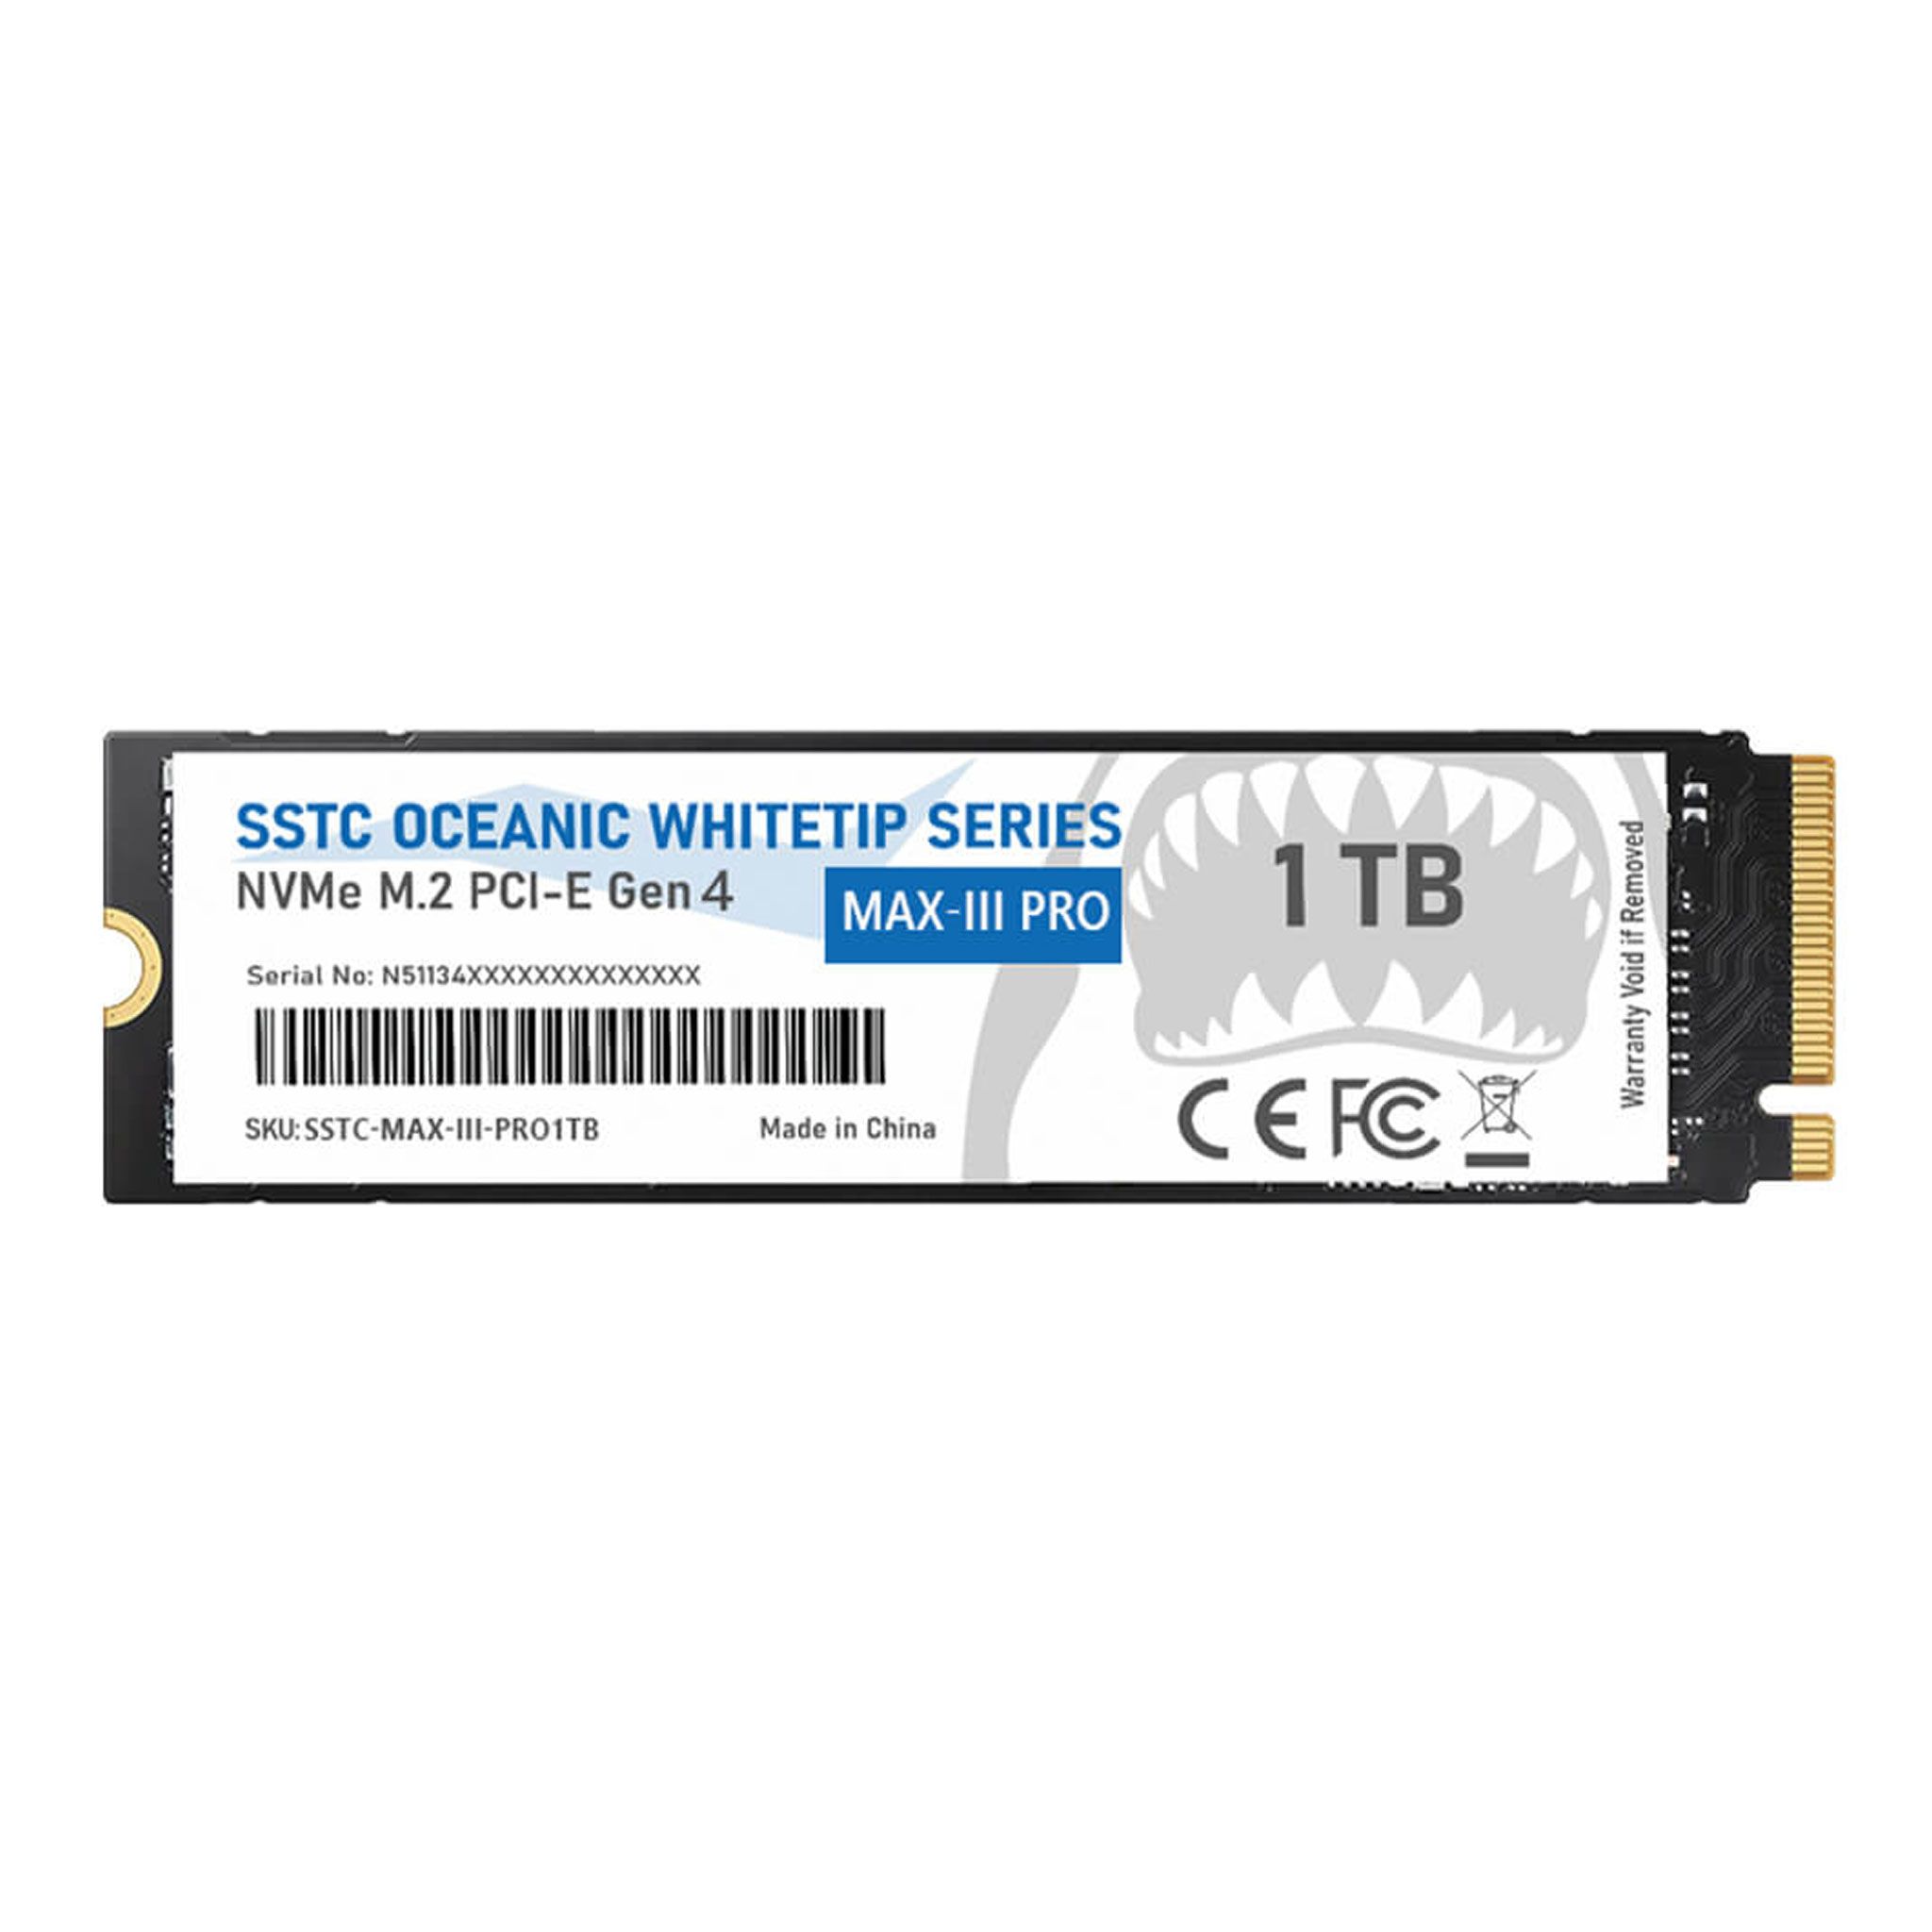 Ổ cứng SSD SSTC Oceanic Whitetip MAX-III Pro 1TB